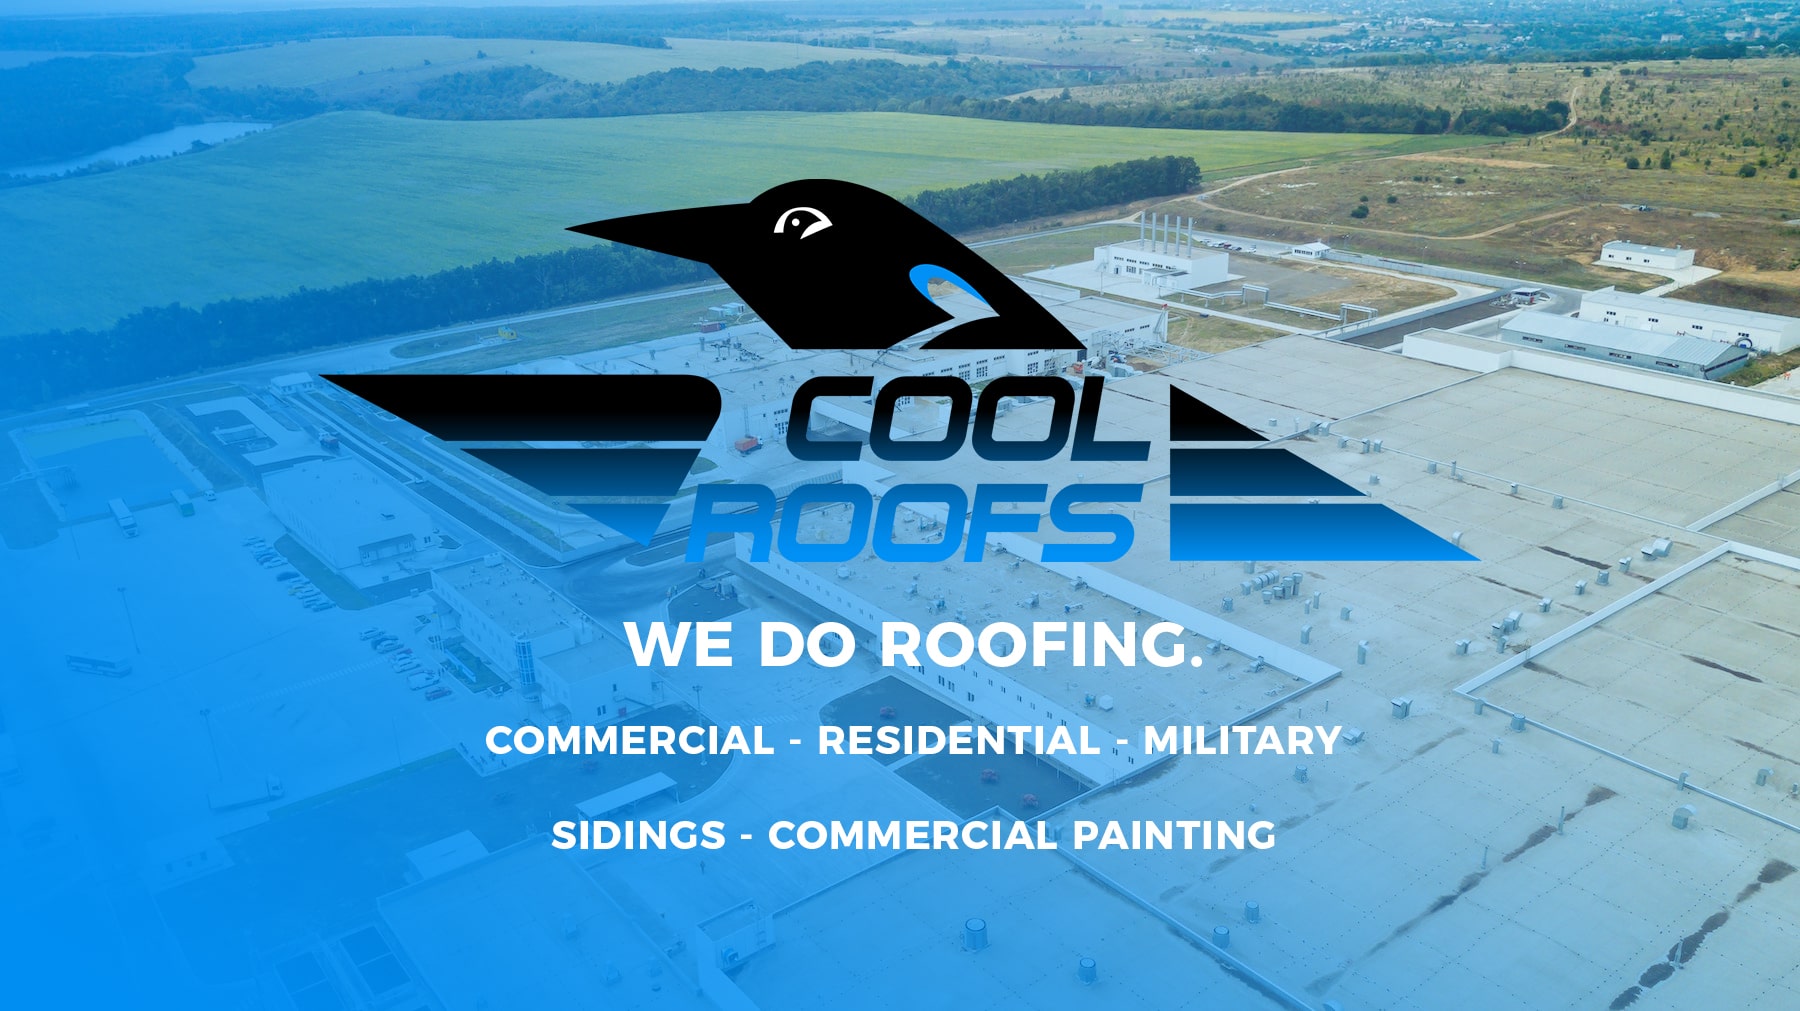 New Braunfels Roofing - Cool Roofs Inc.